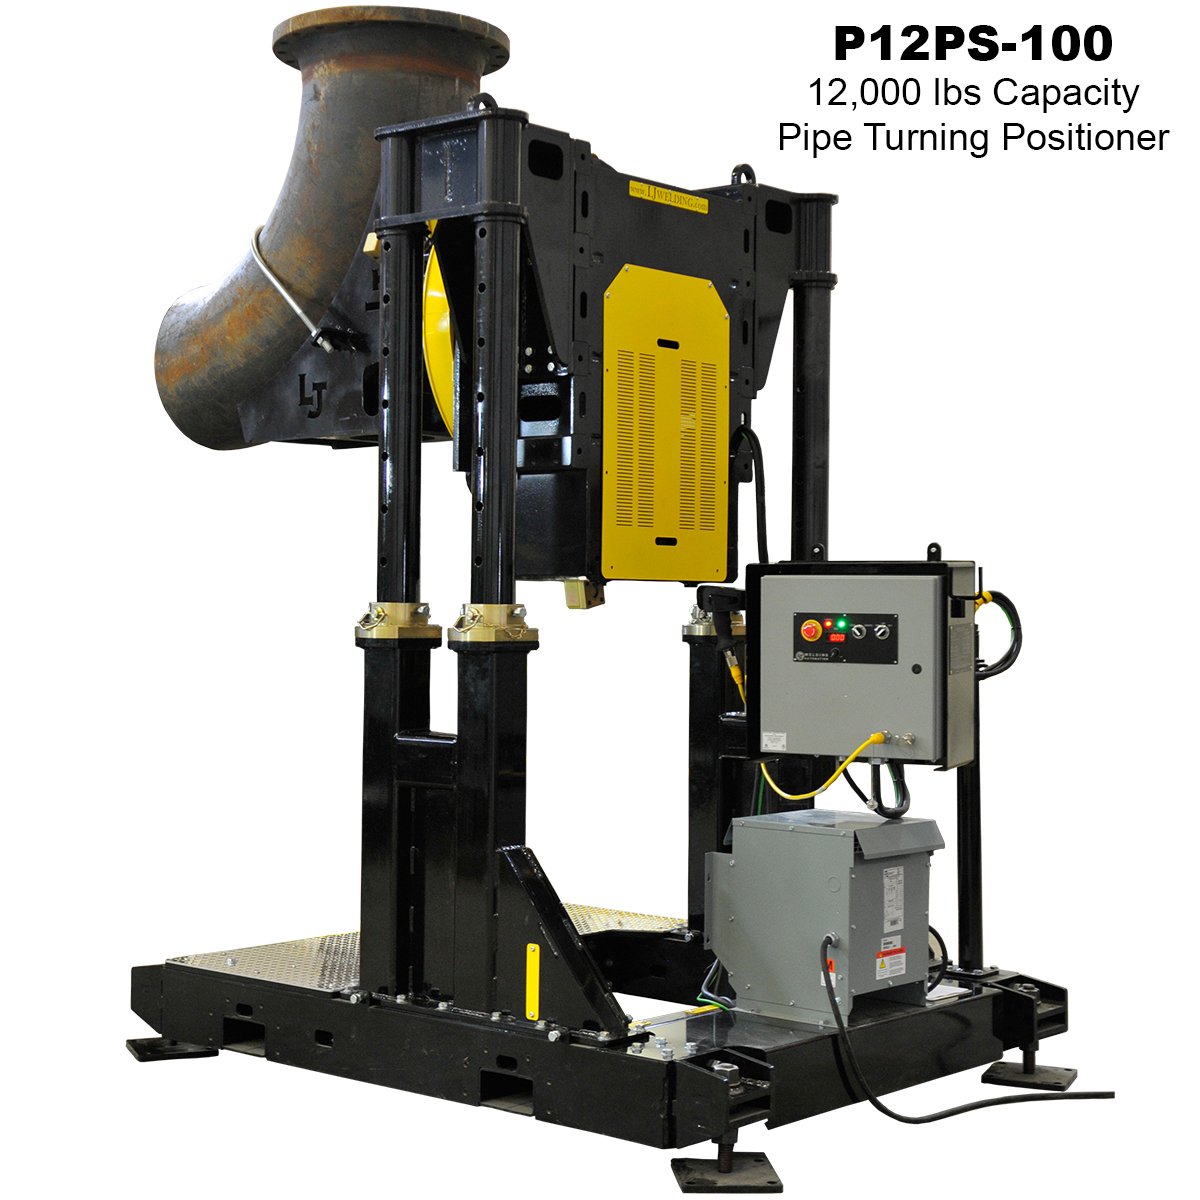 02-12000-lb-Pipe-Turning-Positioner